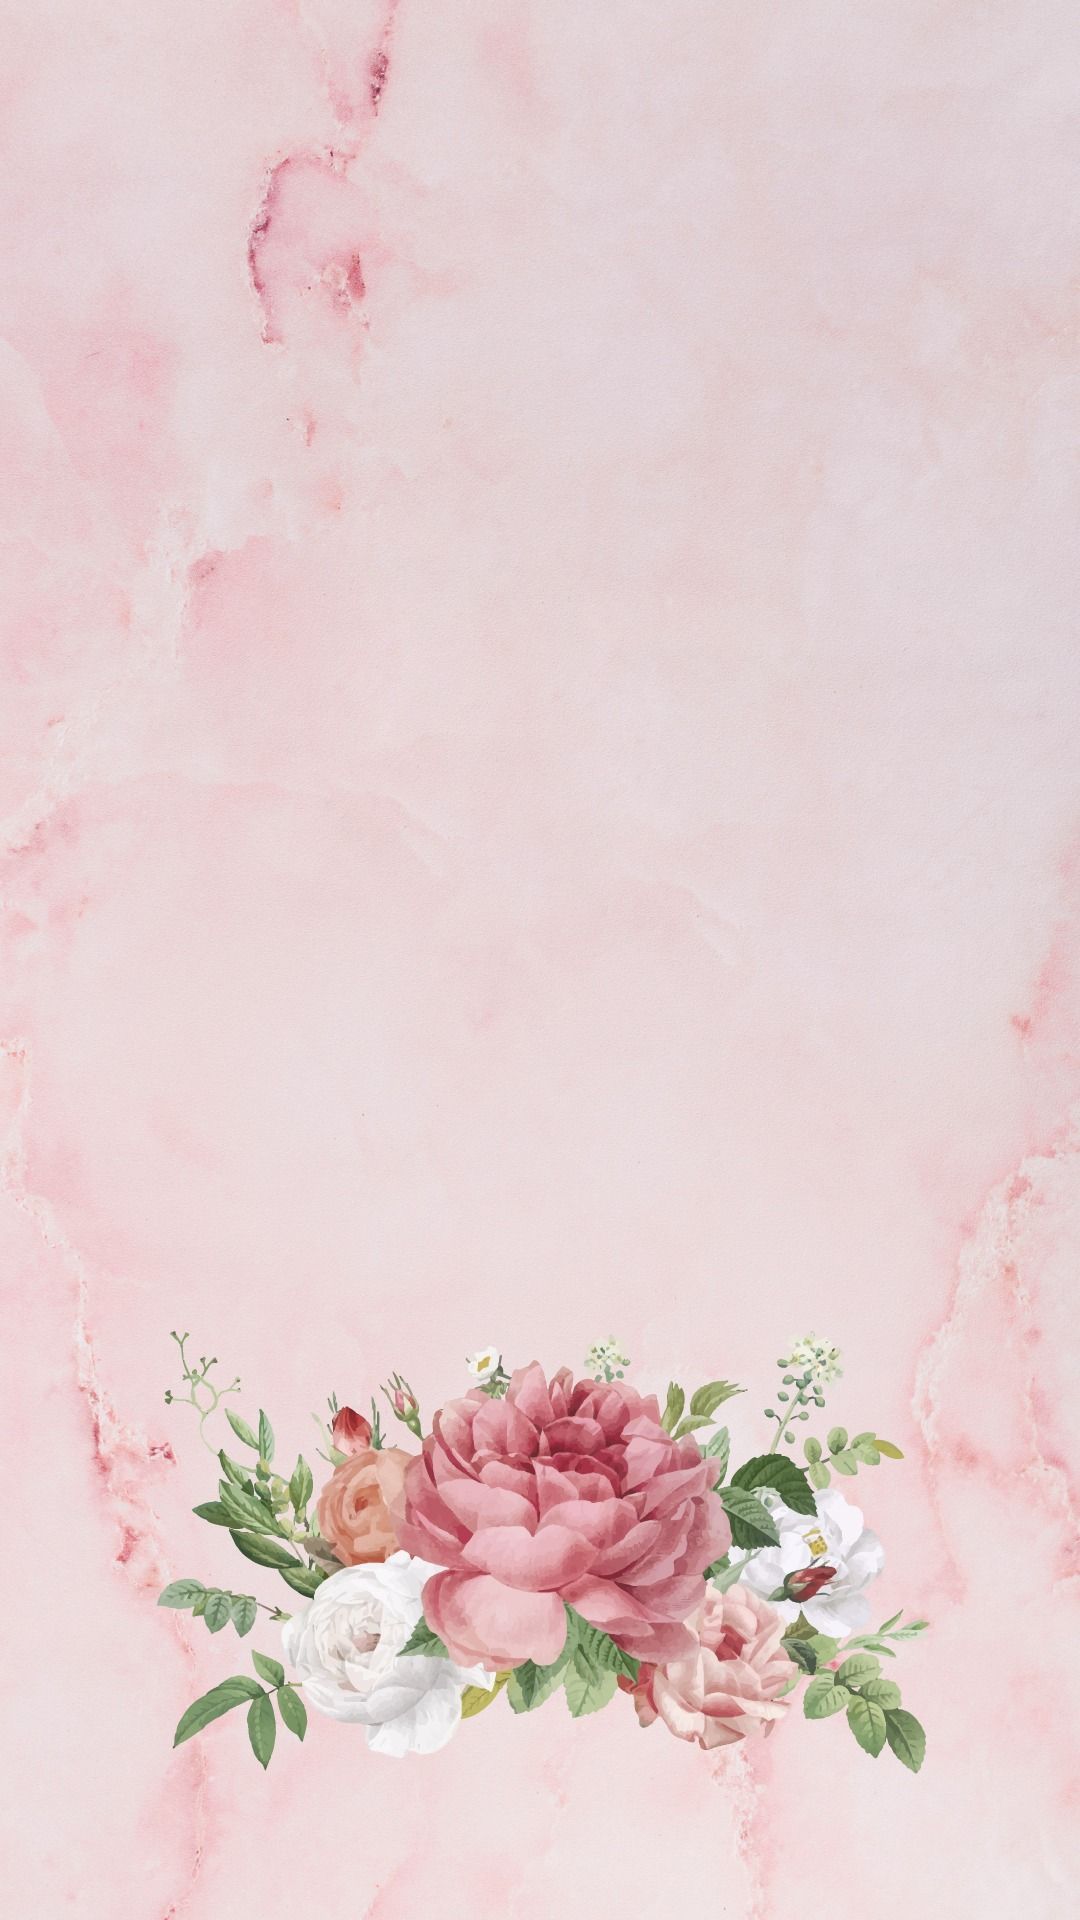 Aesthetic Pink And White Wallpaper Ios .com